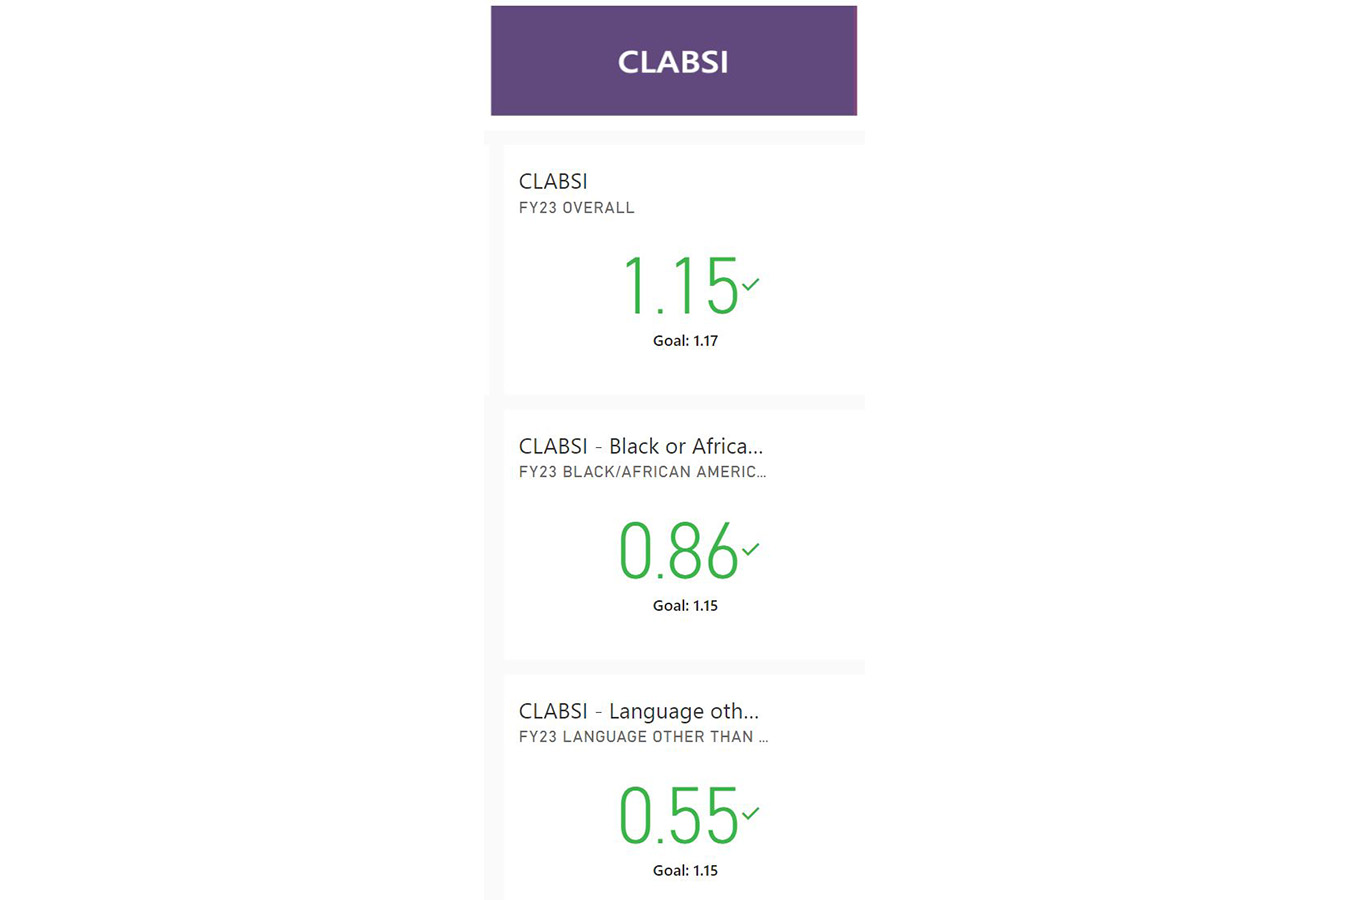 CLASBI overall is at 1.15%, exceeding the goal of 1.17%